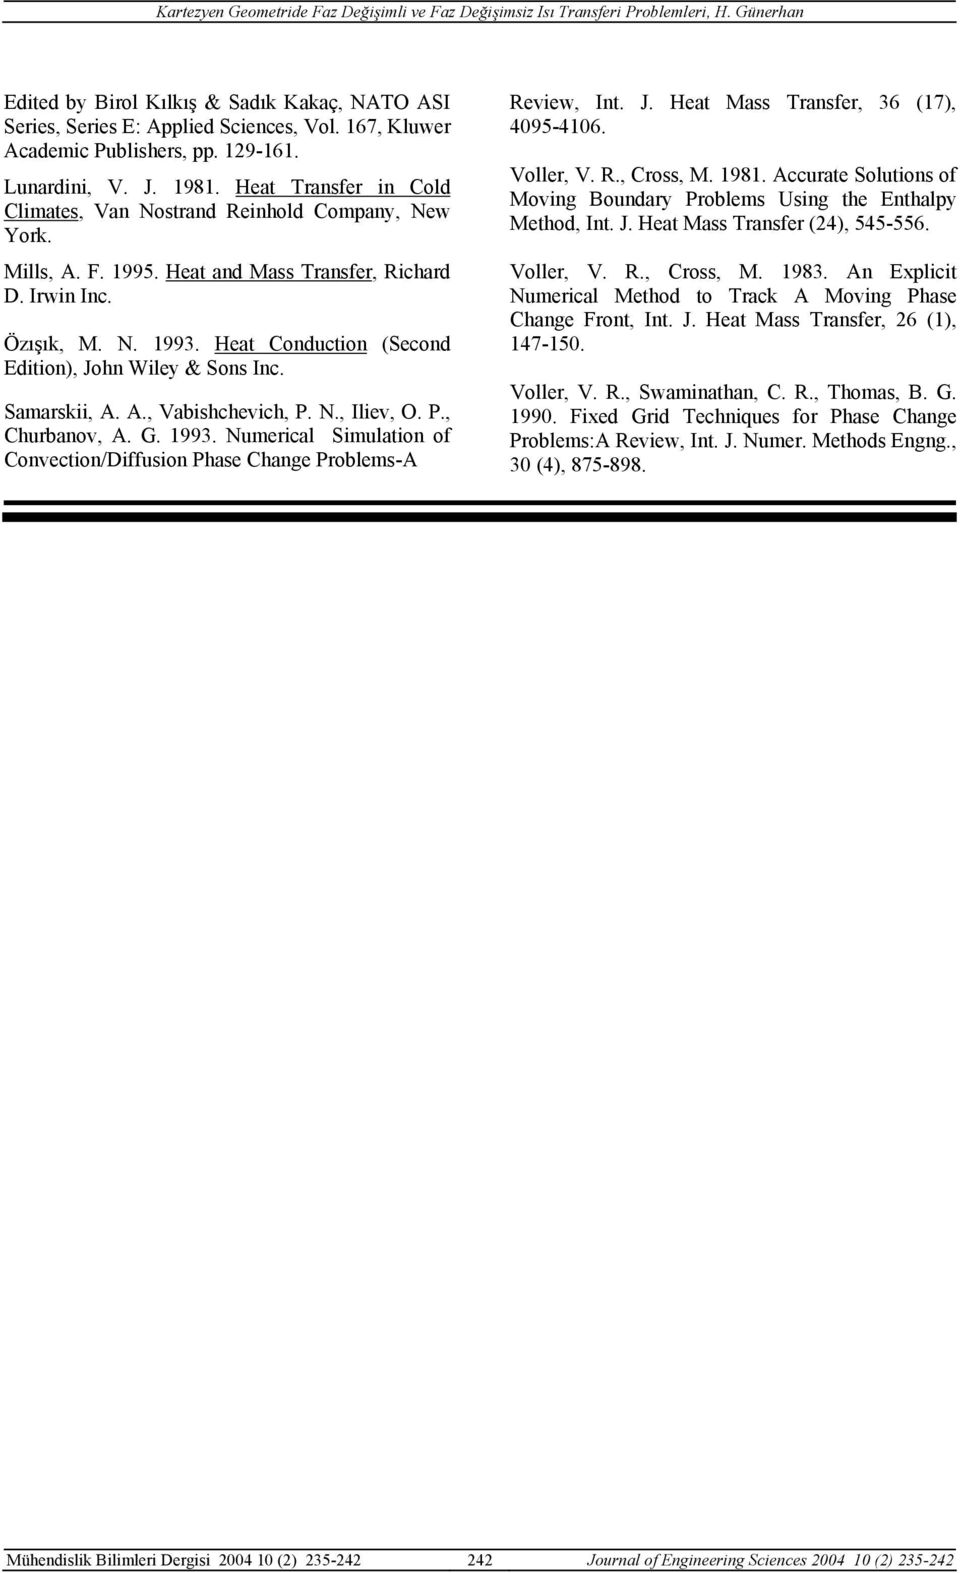 Heat Conduction (Second Edition), John Wiey & Son Inc. Saarkii, A. A., Vabihchevich, P. N., Iiev, O. P., Churbanov, A. G. 1993. Nuerica Siuation of Convection/Diffuion Phae Change Probe-A Review, Int.